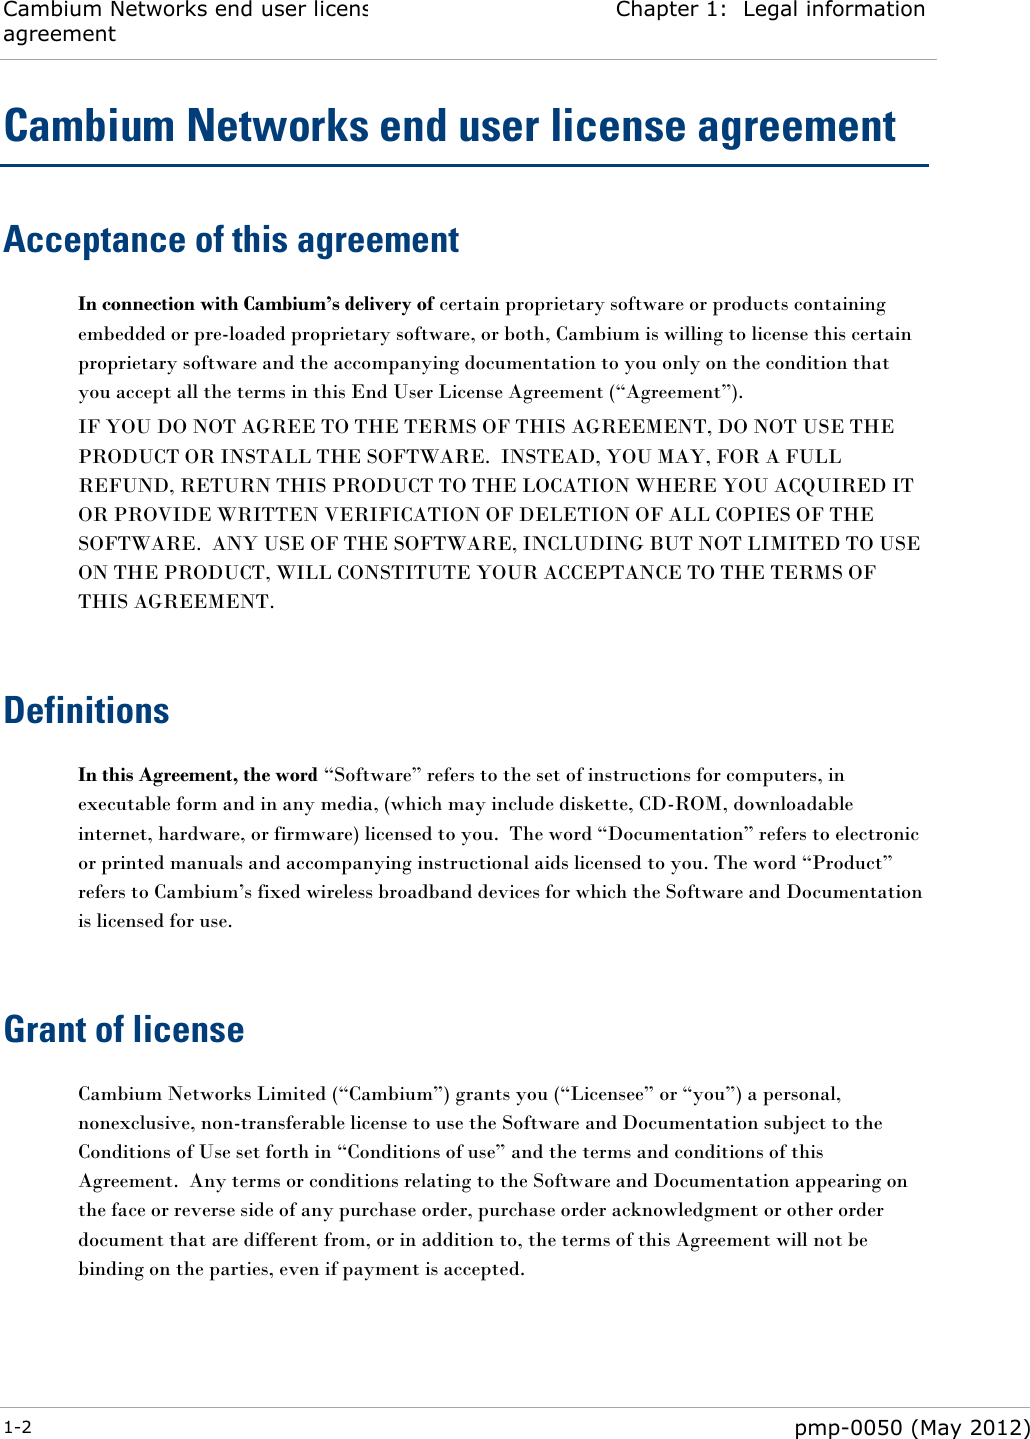 Cambium Networks end user license agreement Chapter 1:  Legal information  1-2  pmp-0050 (May 2012)  Cambium Networks end user license agreement Acceptance of this agreement In connection with Cambium’s delivery of certain proprietary software or products containing embedded or pre-loaded proprietary software, or both, Cambium is willing to license this certain proprietary software and the accompanying documentation to you only on the condition that you accept all the terms in this End User License Agreement (―Agreement‖). IF YOU DO NOT AGREE TO THE TERMS OF THIS AGREEMENT, DO NOT USE THE PRODUCT OR INSTALL THE SOFTWARE.  INSTEAD, YOU MAY, FOR A FULL REFUND, RETURN THIS PRODUCT TO THE LOCATION WHERE YOU ACQUIRED IT OR PROVIDE WRITTEN VERIFICATION OF DELETION OF ALL COPIES OF THE SOFTWARE.  ANY USE OF THE SOFTWARE, INCLUDING BUT NOT LIMITED TO USE ON THE PRODUCT, WILL CONSTITUTE YOUR ACCEPTANCE TO THE TERMS OF THIS AGREEMENT.   Definitions In this Agreement, the word ―Software‖ refers to the set of instructions for computers, in executable form and in any media, (which may include diskette, CD-ROM, downloadable internet, hardware, or firmware) licensed to you.  The word ―Documentation‖ refers to electronic or printed manuals and accompanying instructional aids licensed to you. The word ―Product‖ refers to Cambium‘s fixed wireless broadband devices for which the Software and Documentation is licensed for use.   Grant of license Cambium Networks Limited (―Cambium‖) grants you (―Licensee‖ or ―you‖) a personal, nonexclusive, non-transferable license to use the Software and Documentation subject to the Conditions of Use set forth in ―Conditions of use‖ and the terms and conditions of this Agreement.  Any terms or conditions relating to the Software and Documentation appearing on the face or reverse side of any purchase order, purchase order acknowledgment or other order document that are different from, or in addition to, the terms of this Agreement will not be binding on the parties, even if payment is accepted.   